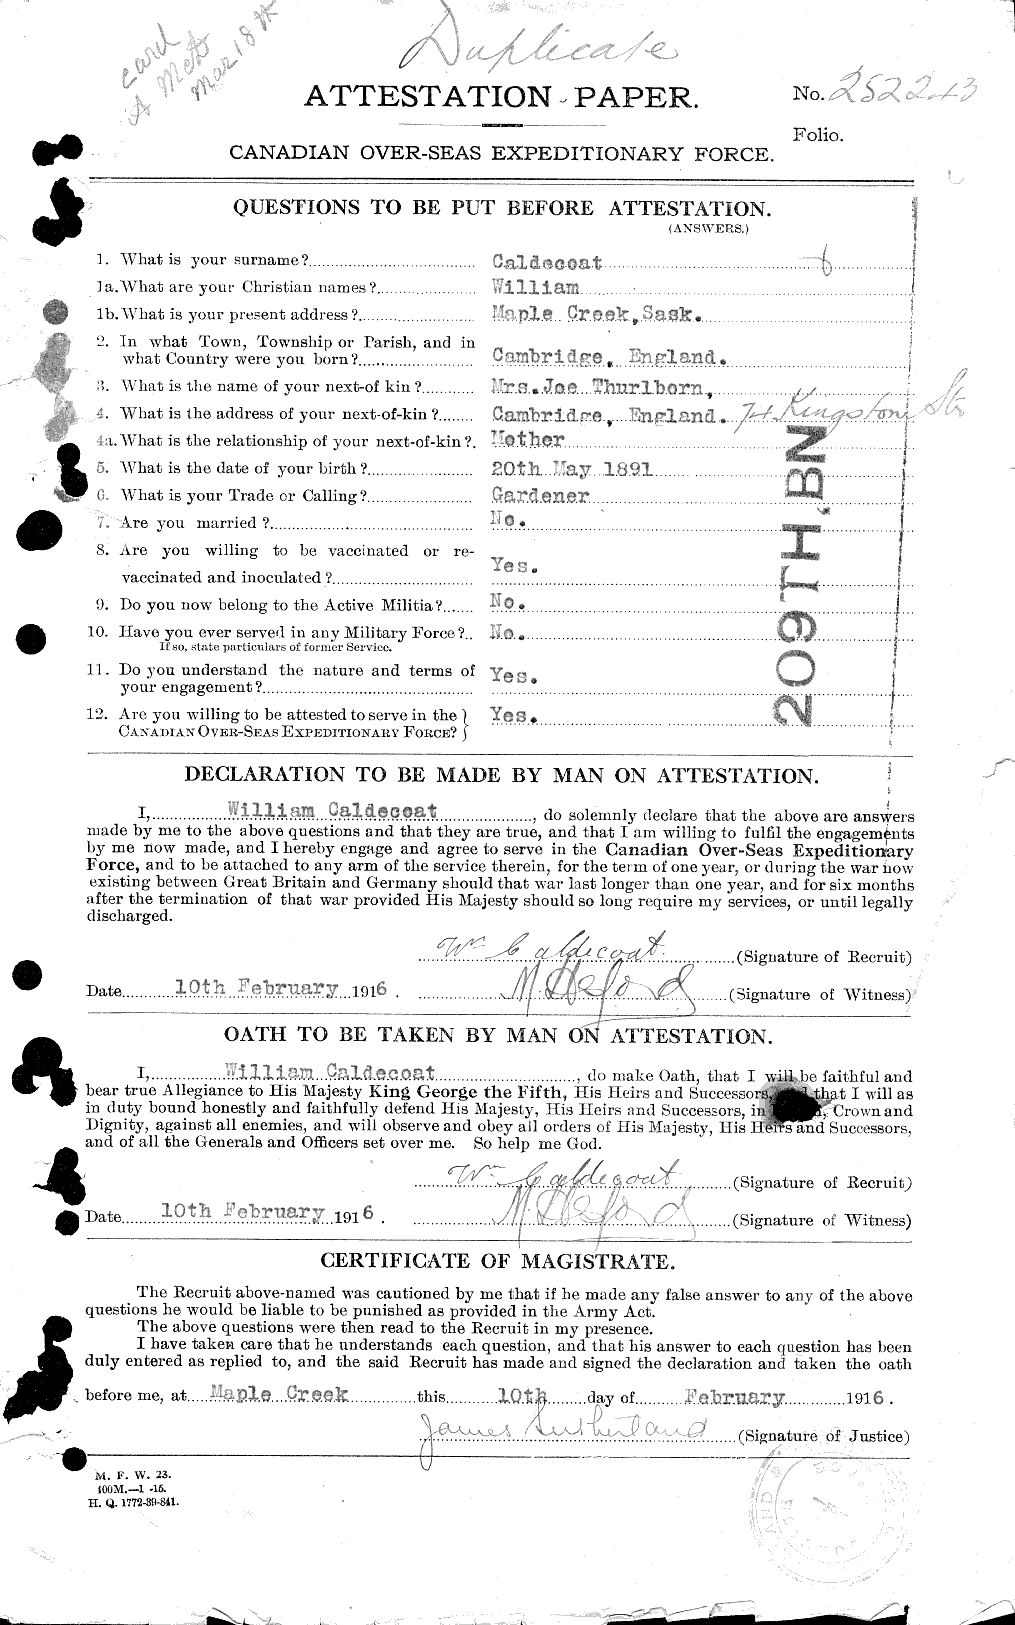 Personnel Records of the First World War - CEF 000914a